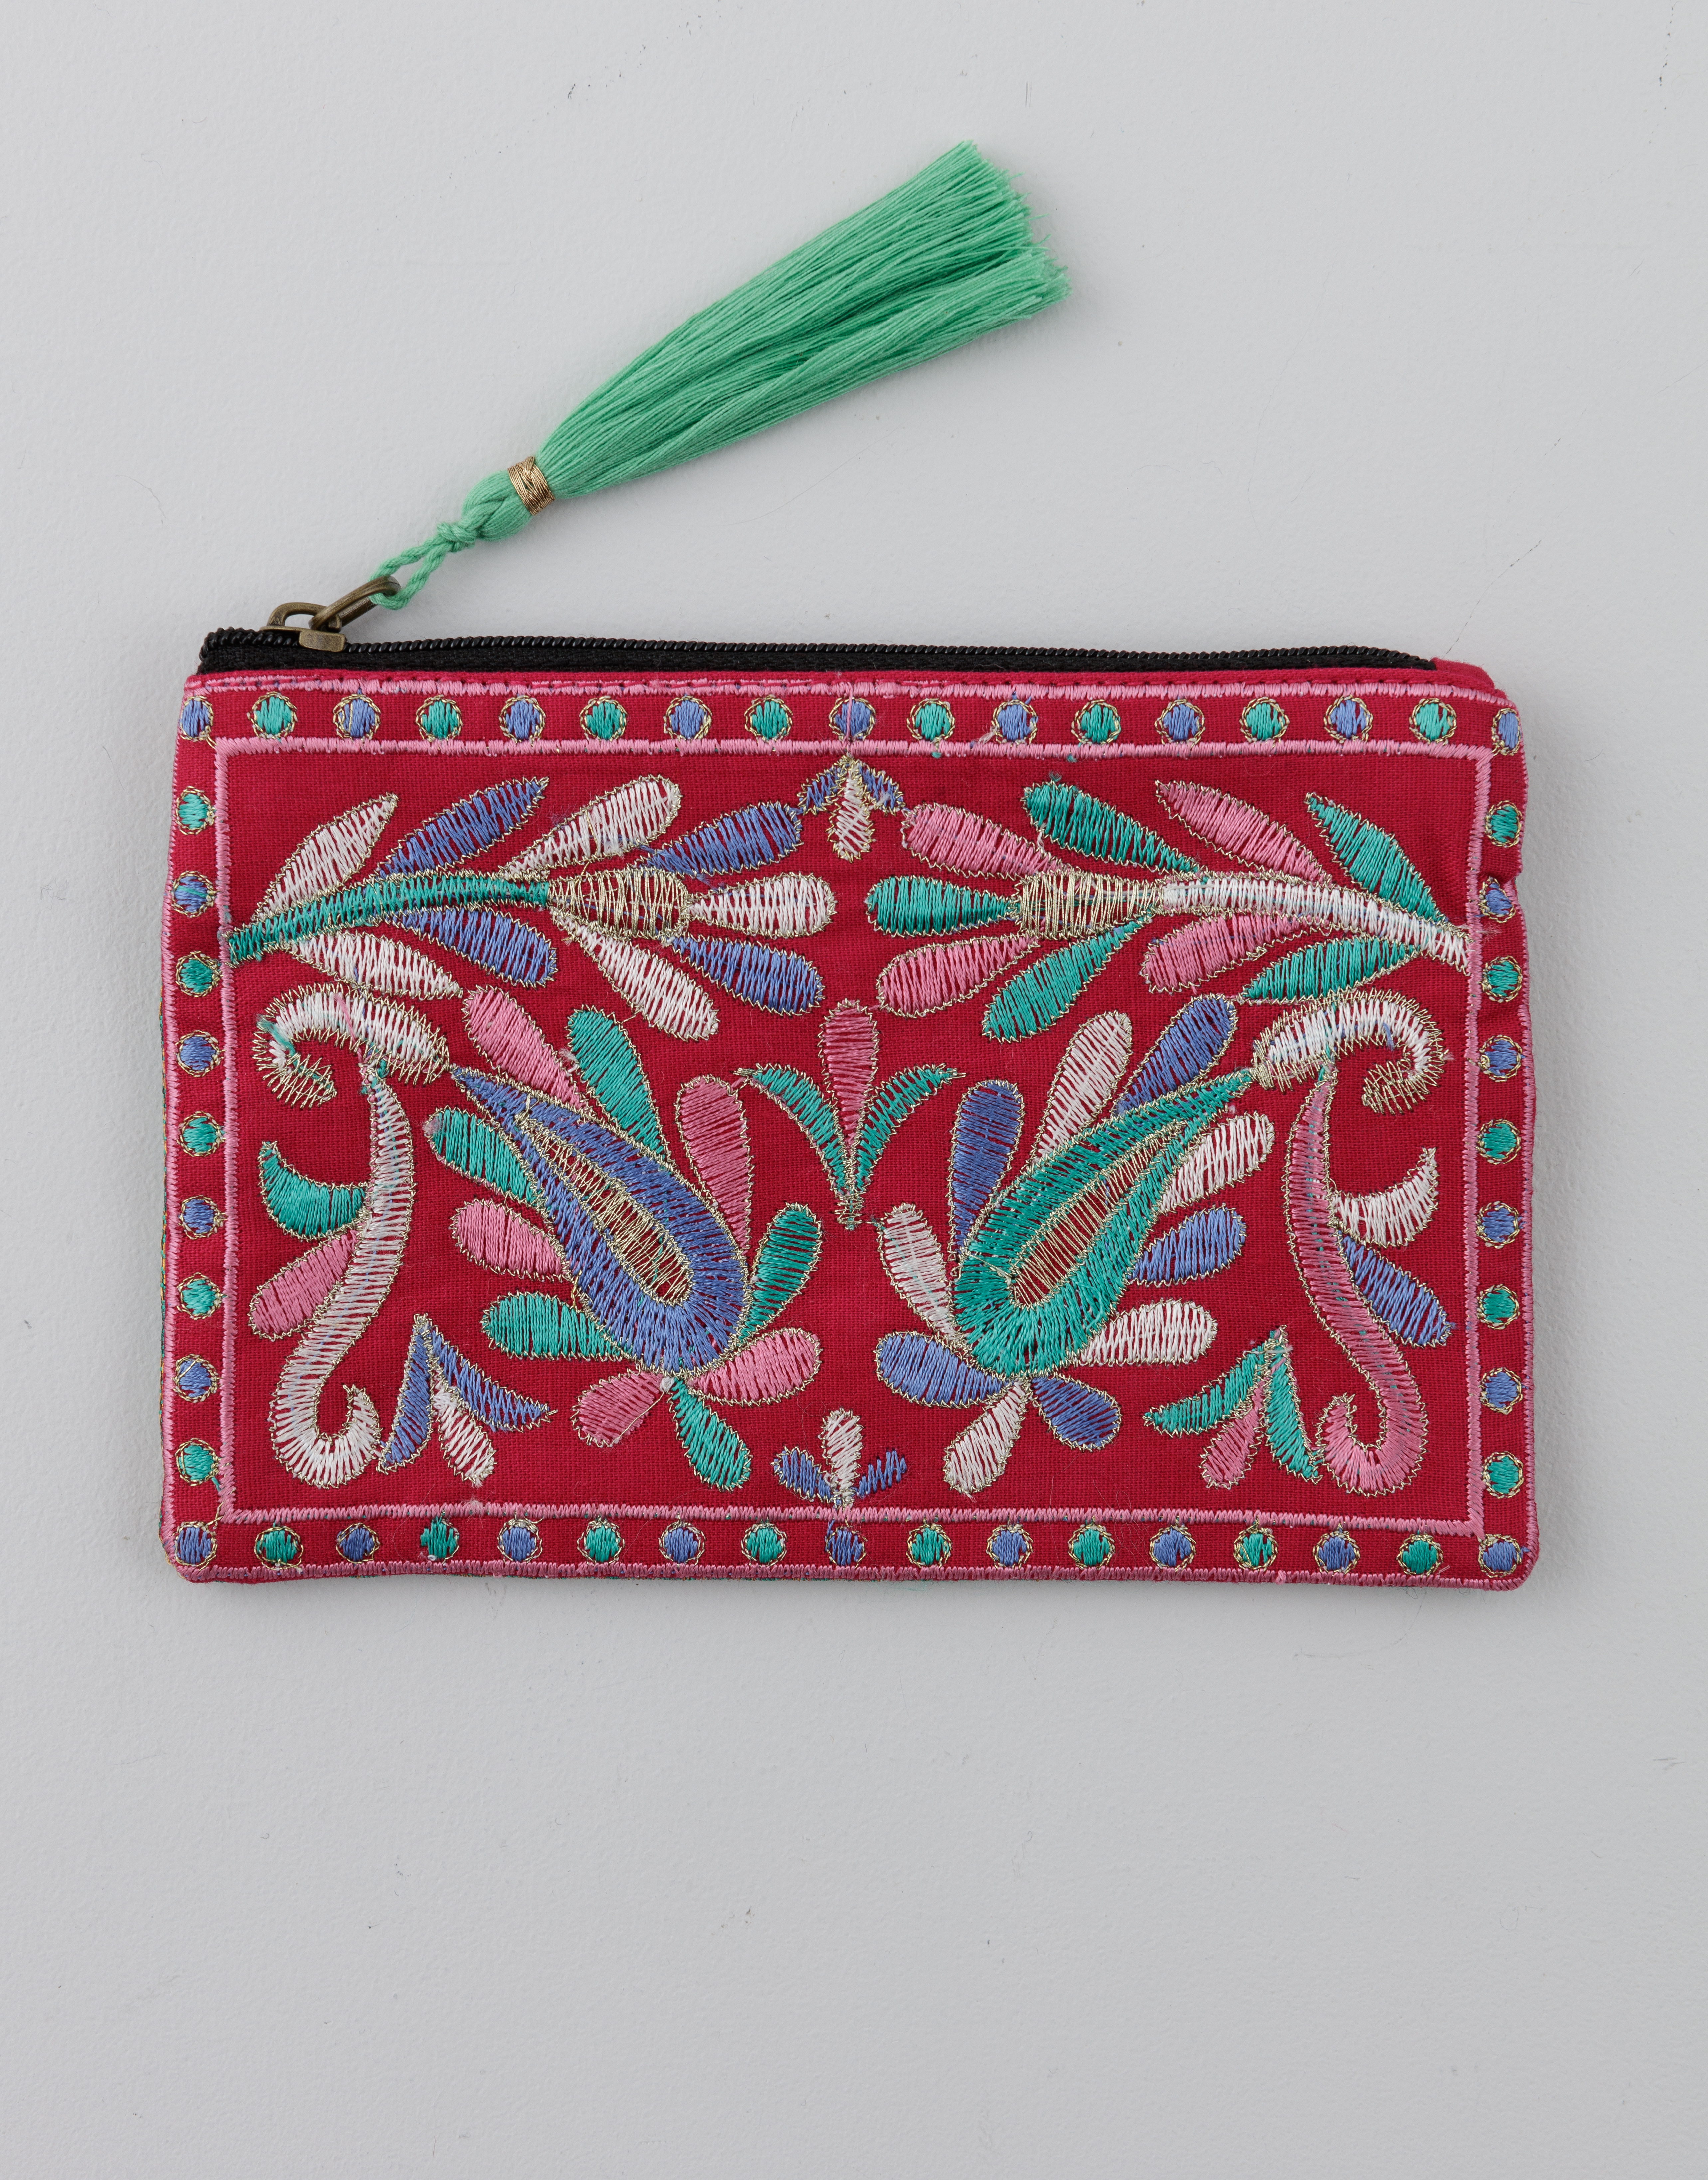 Patterned coin purse